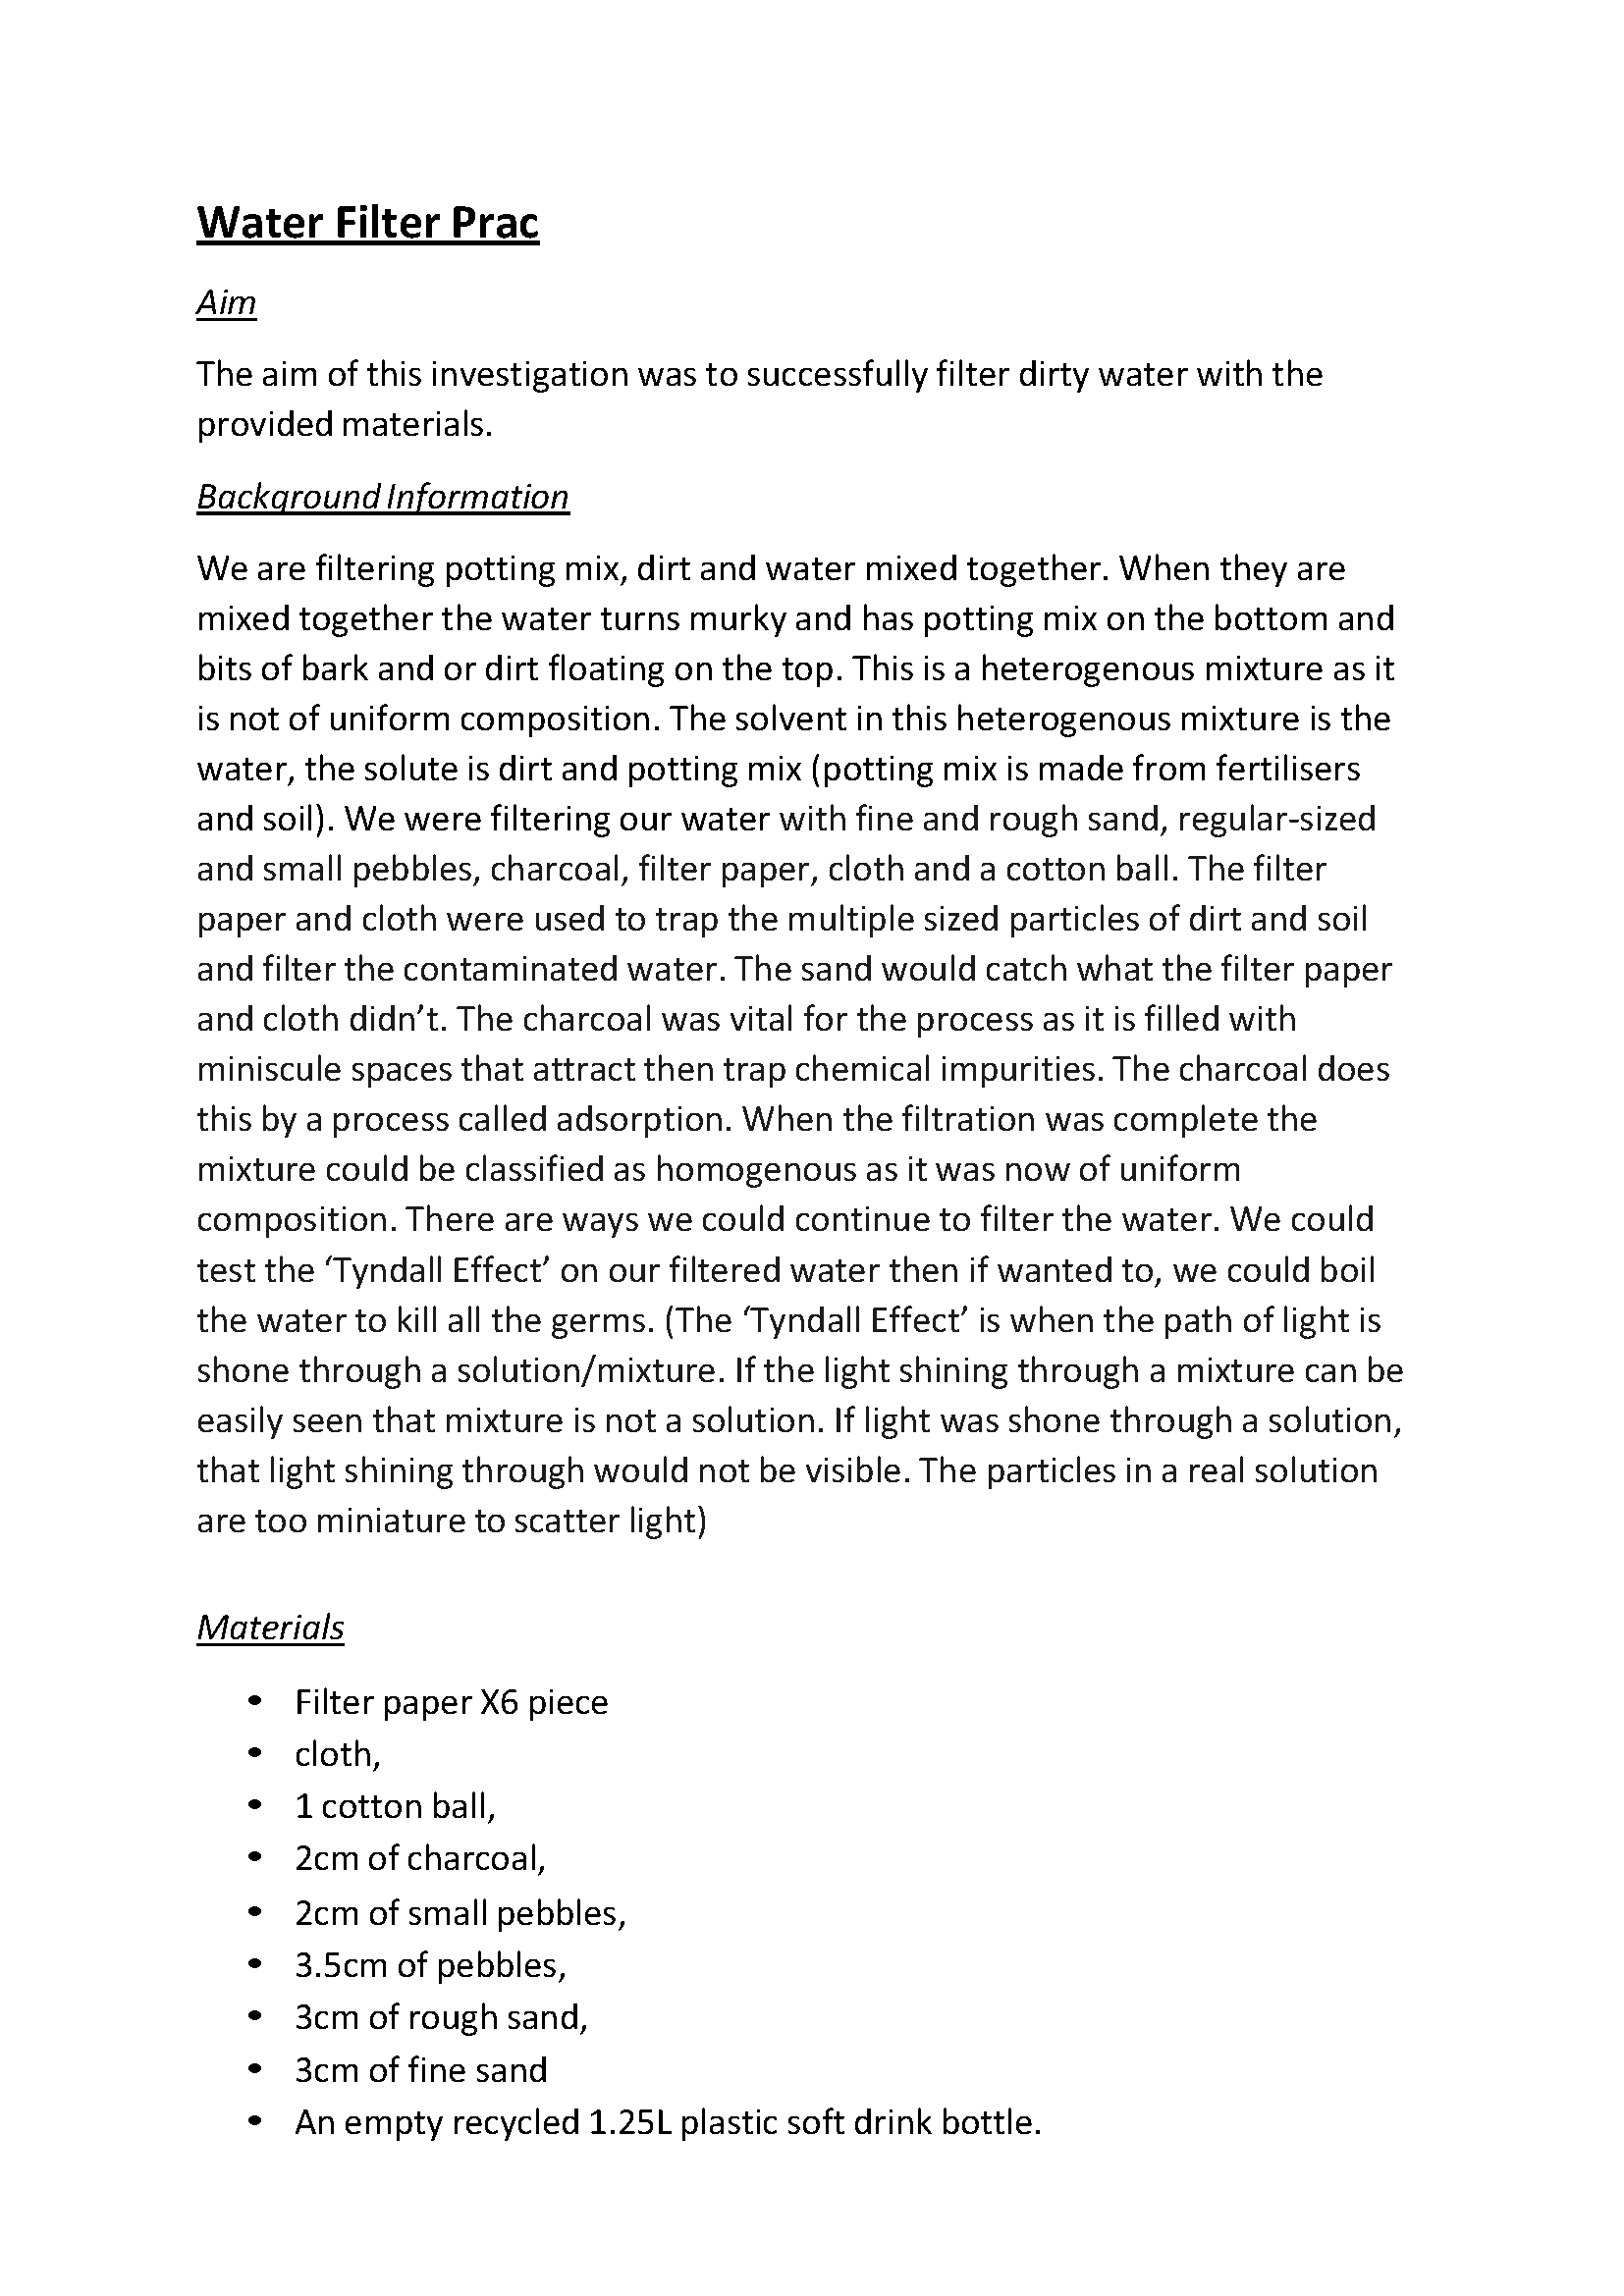 water purification introduction essay